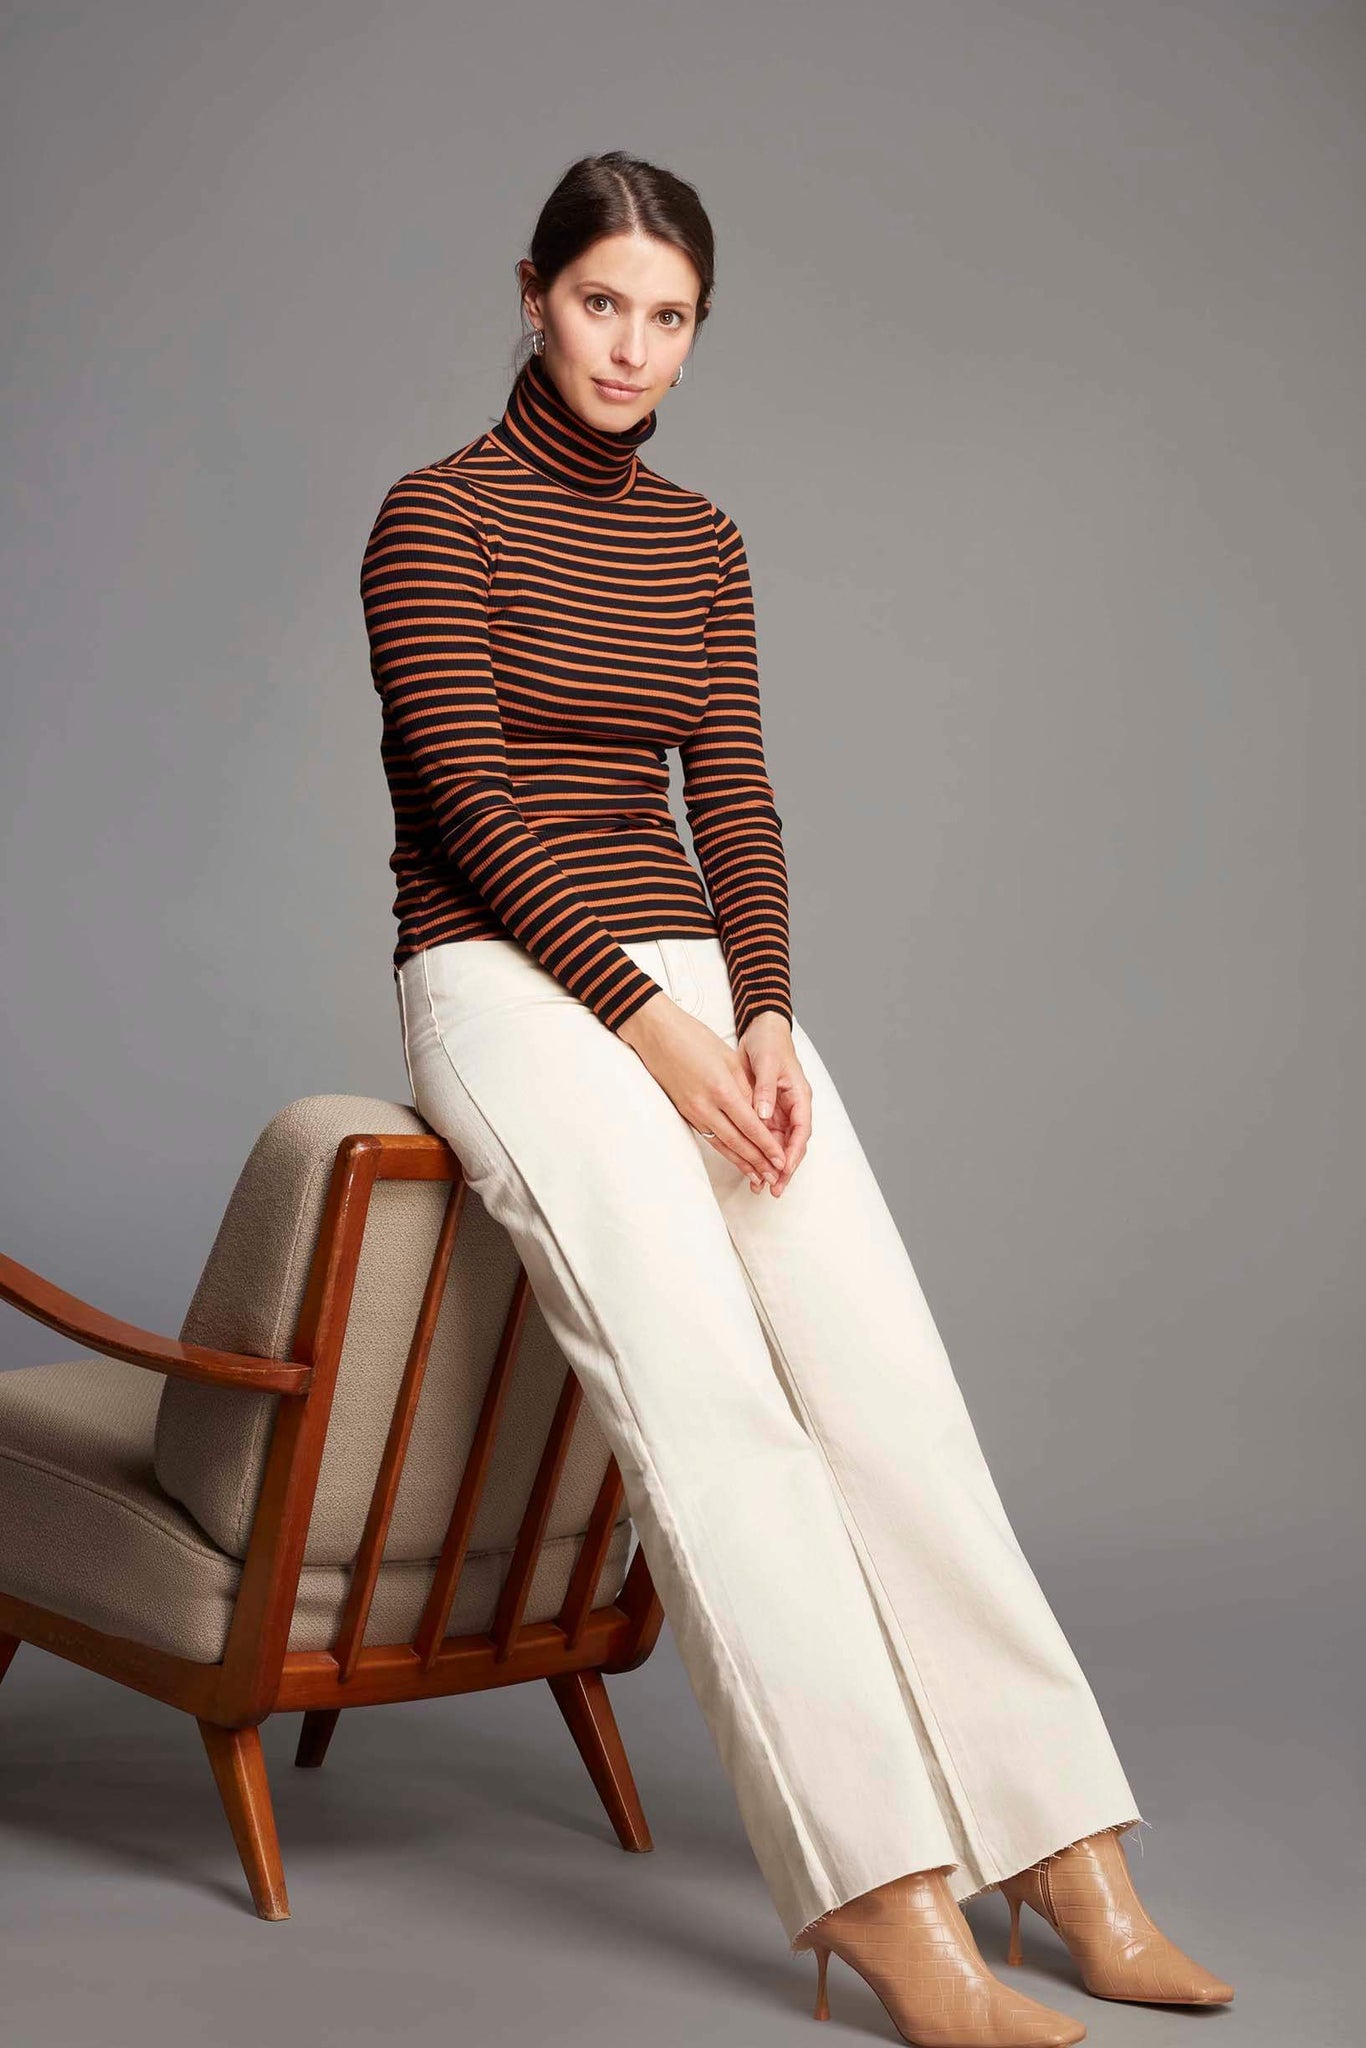 Black Orange Striped Cotton Roll Neck Top - Women's Stripe Roll Neck Top - Long Sleeve Stripe Roll Neck Top by Lavender Hill Clothing